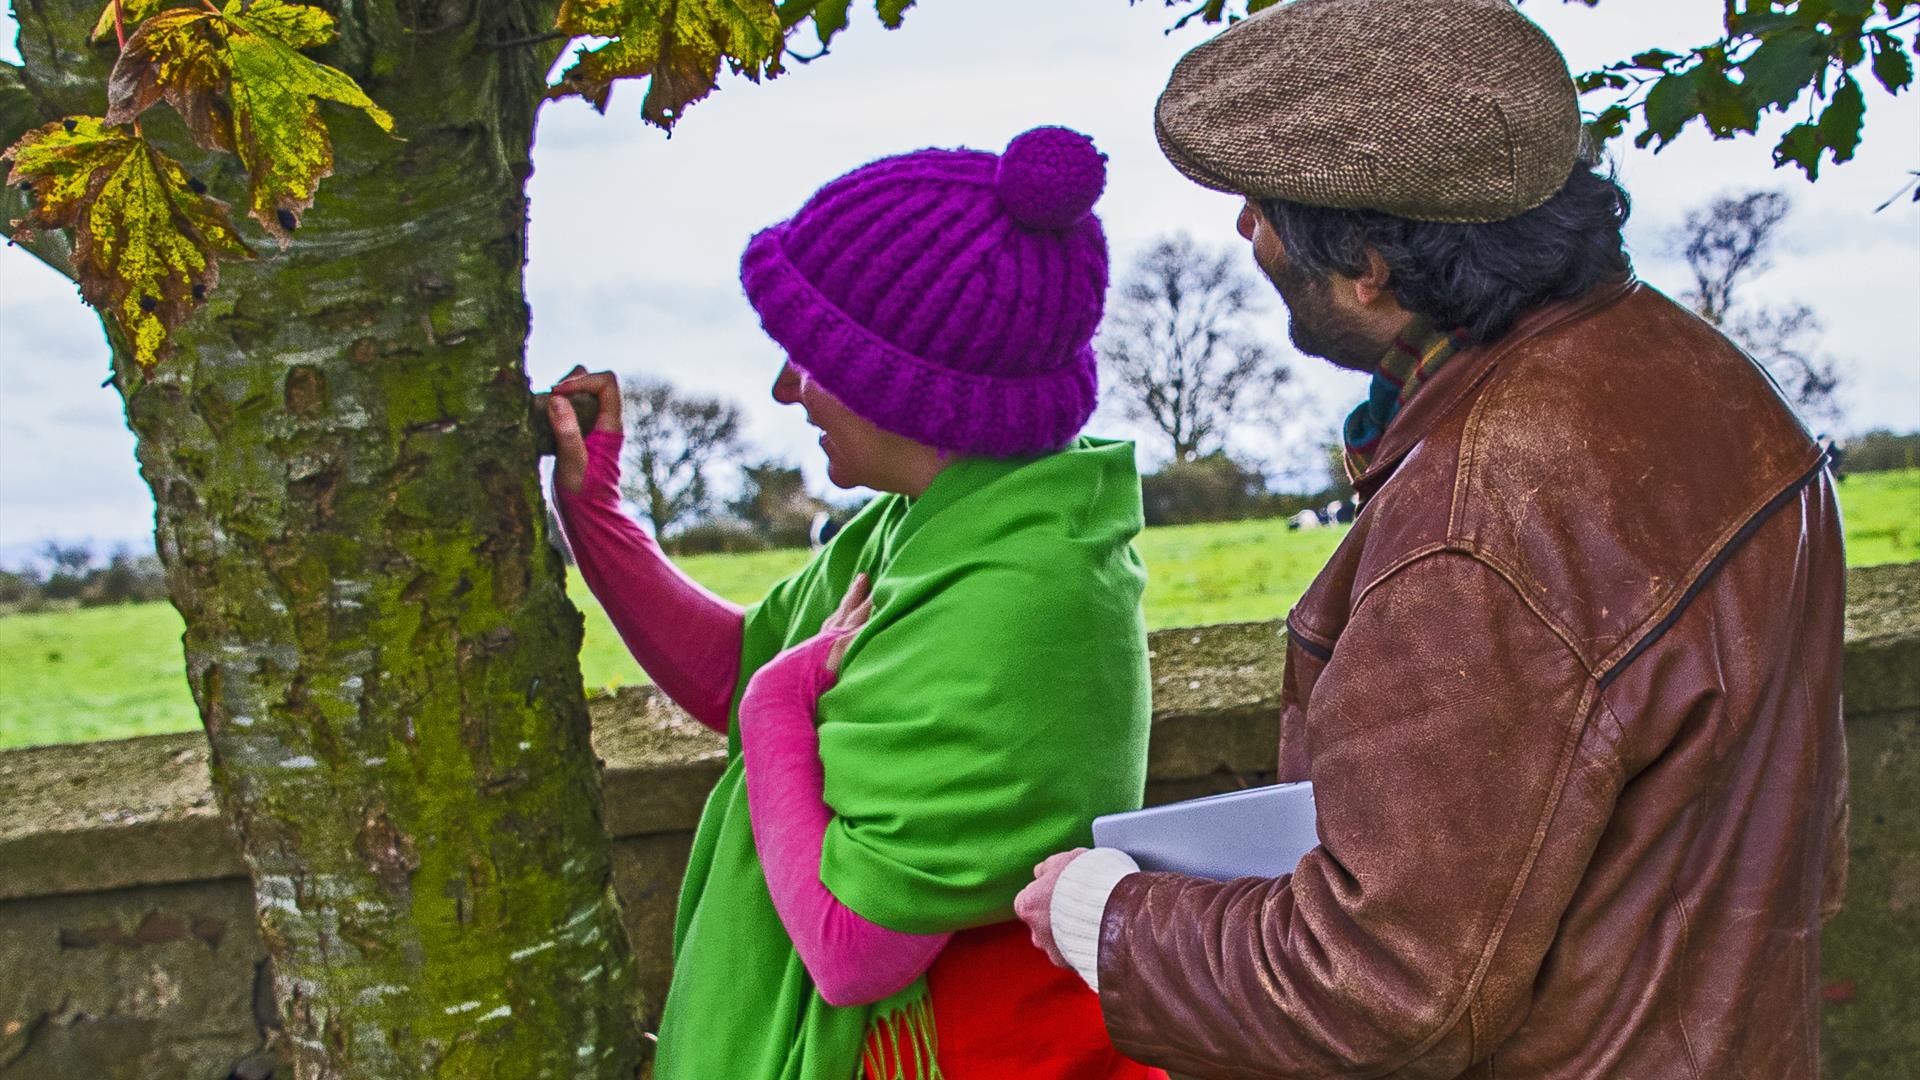 Brightly dressed lady and gentleman looking at tree